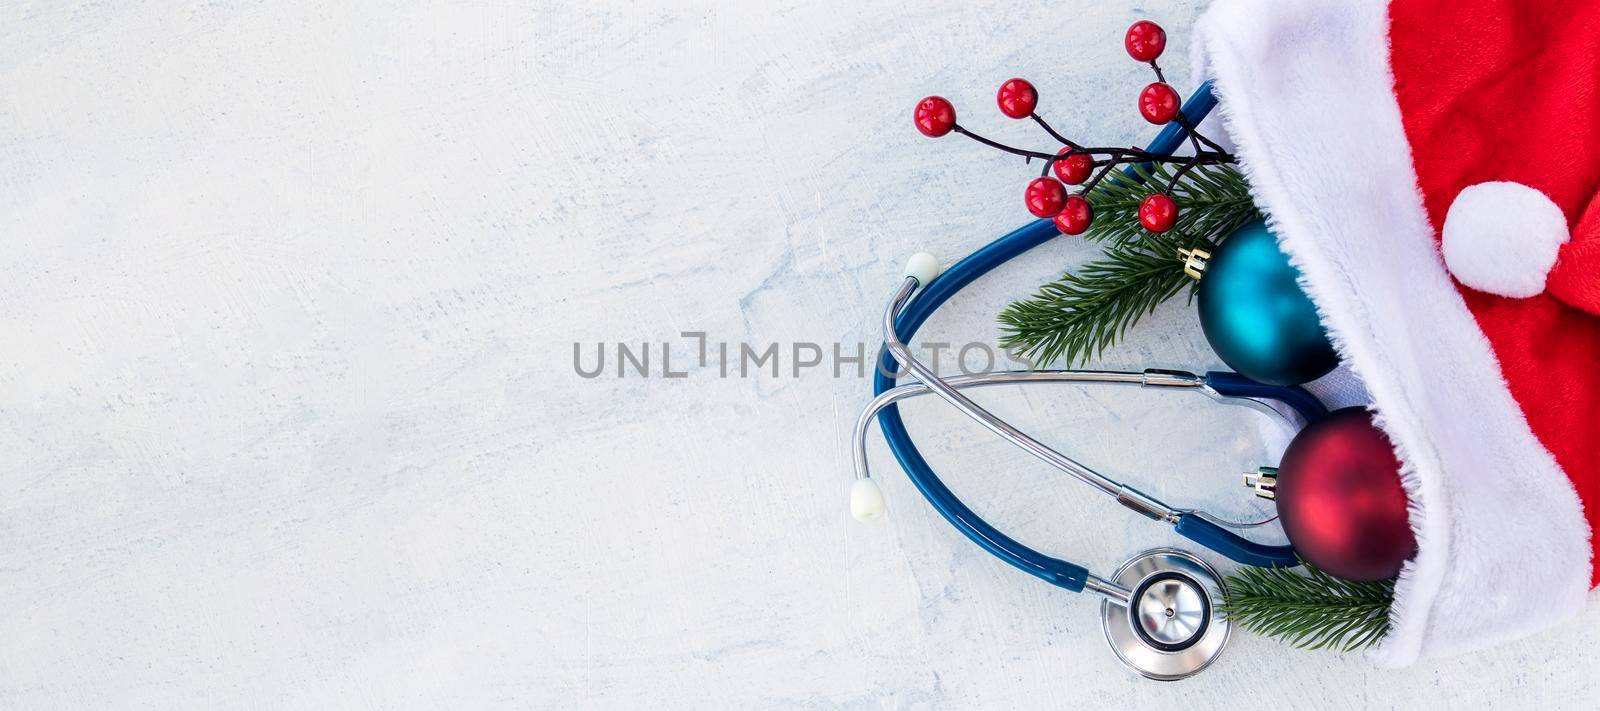 banner with Stethoscope with branches of Christmas tree and Christmas balls in Santa Claus hat. All on a white concrete table. Concept Merry Christmas and Happy New year or Healthy New Year. Copy space. by Leoschka